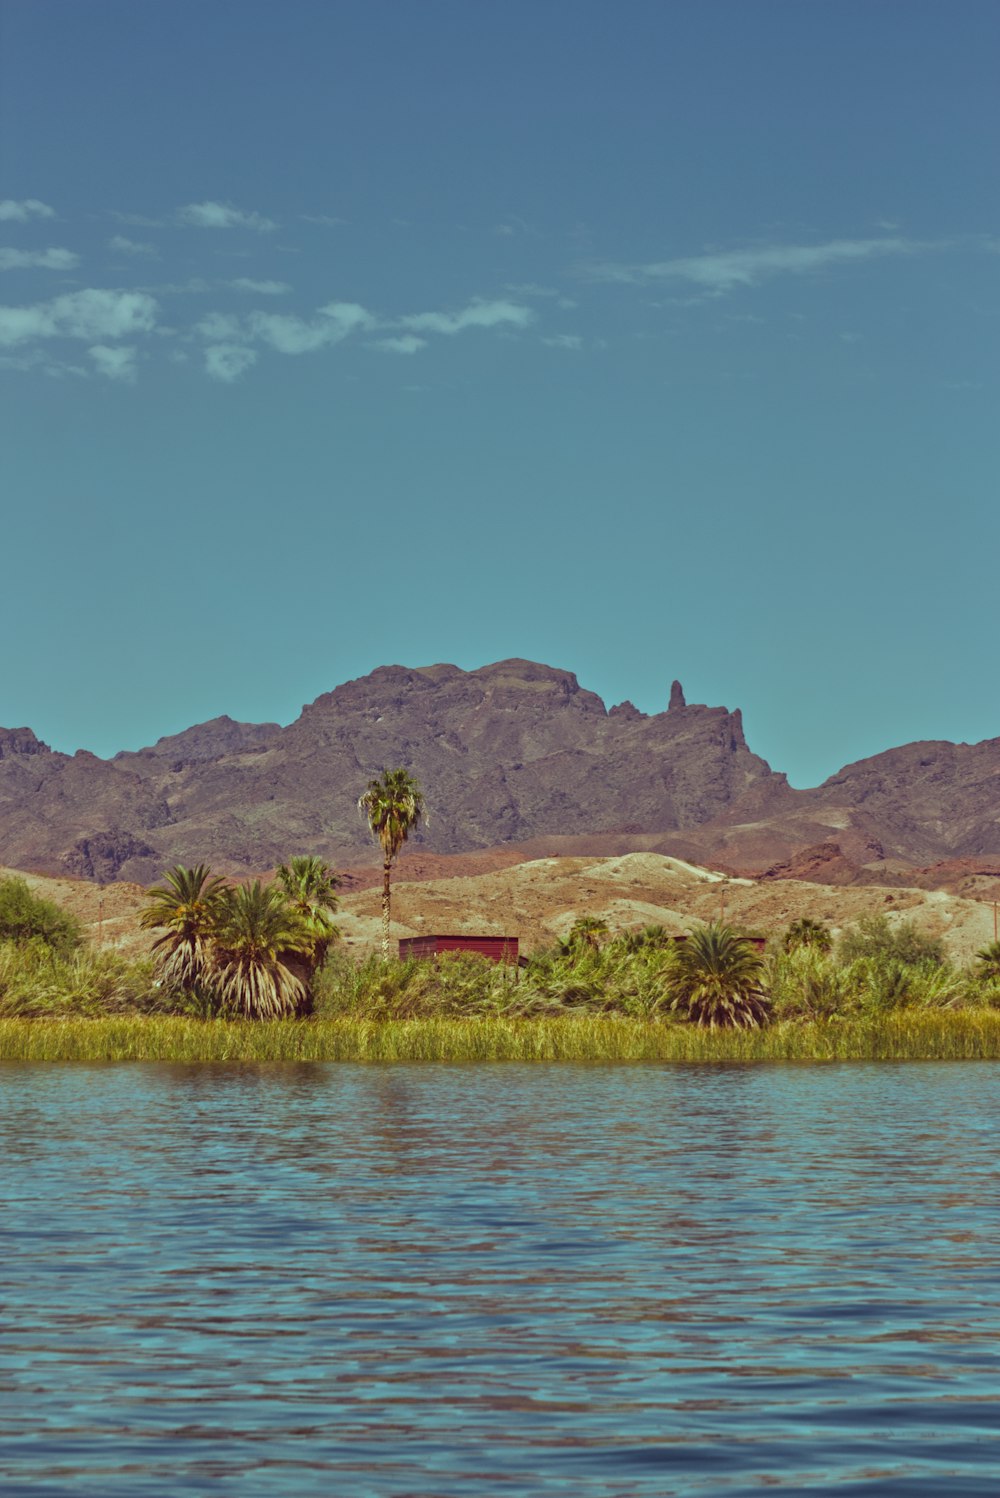 a body of water with palm trees and mountains in the background